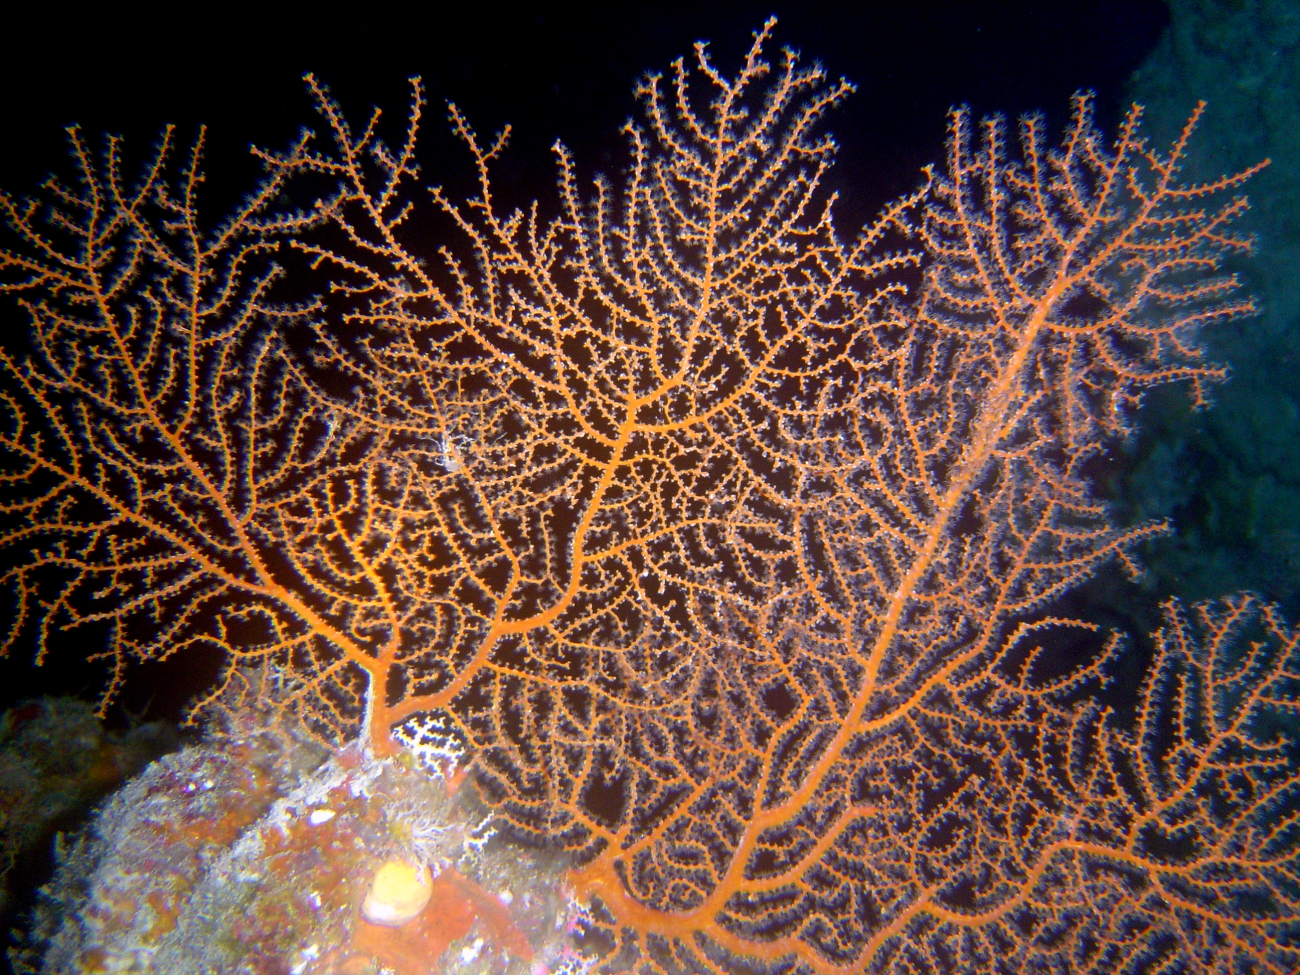 Gorgonian, a type of soft coral